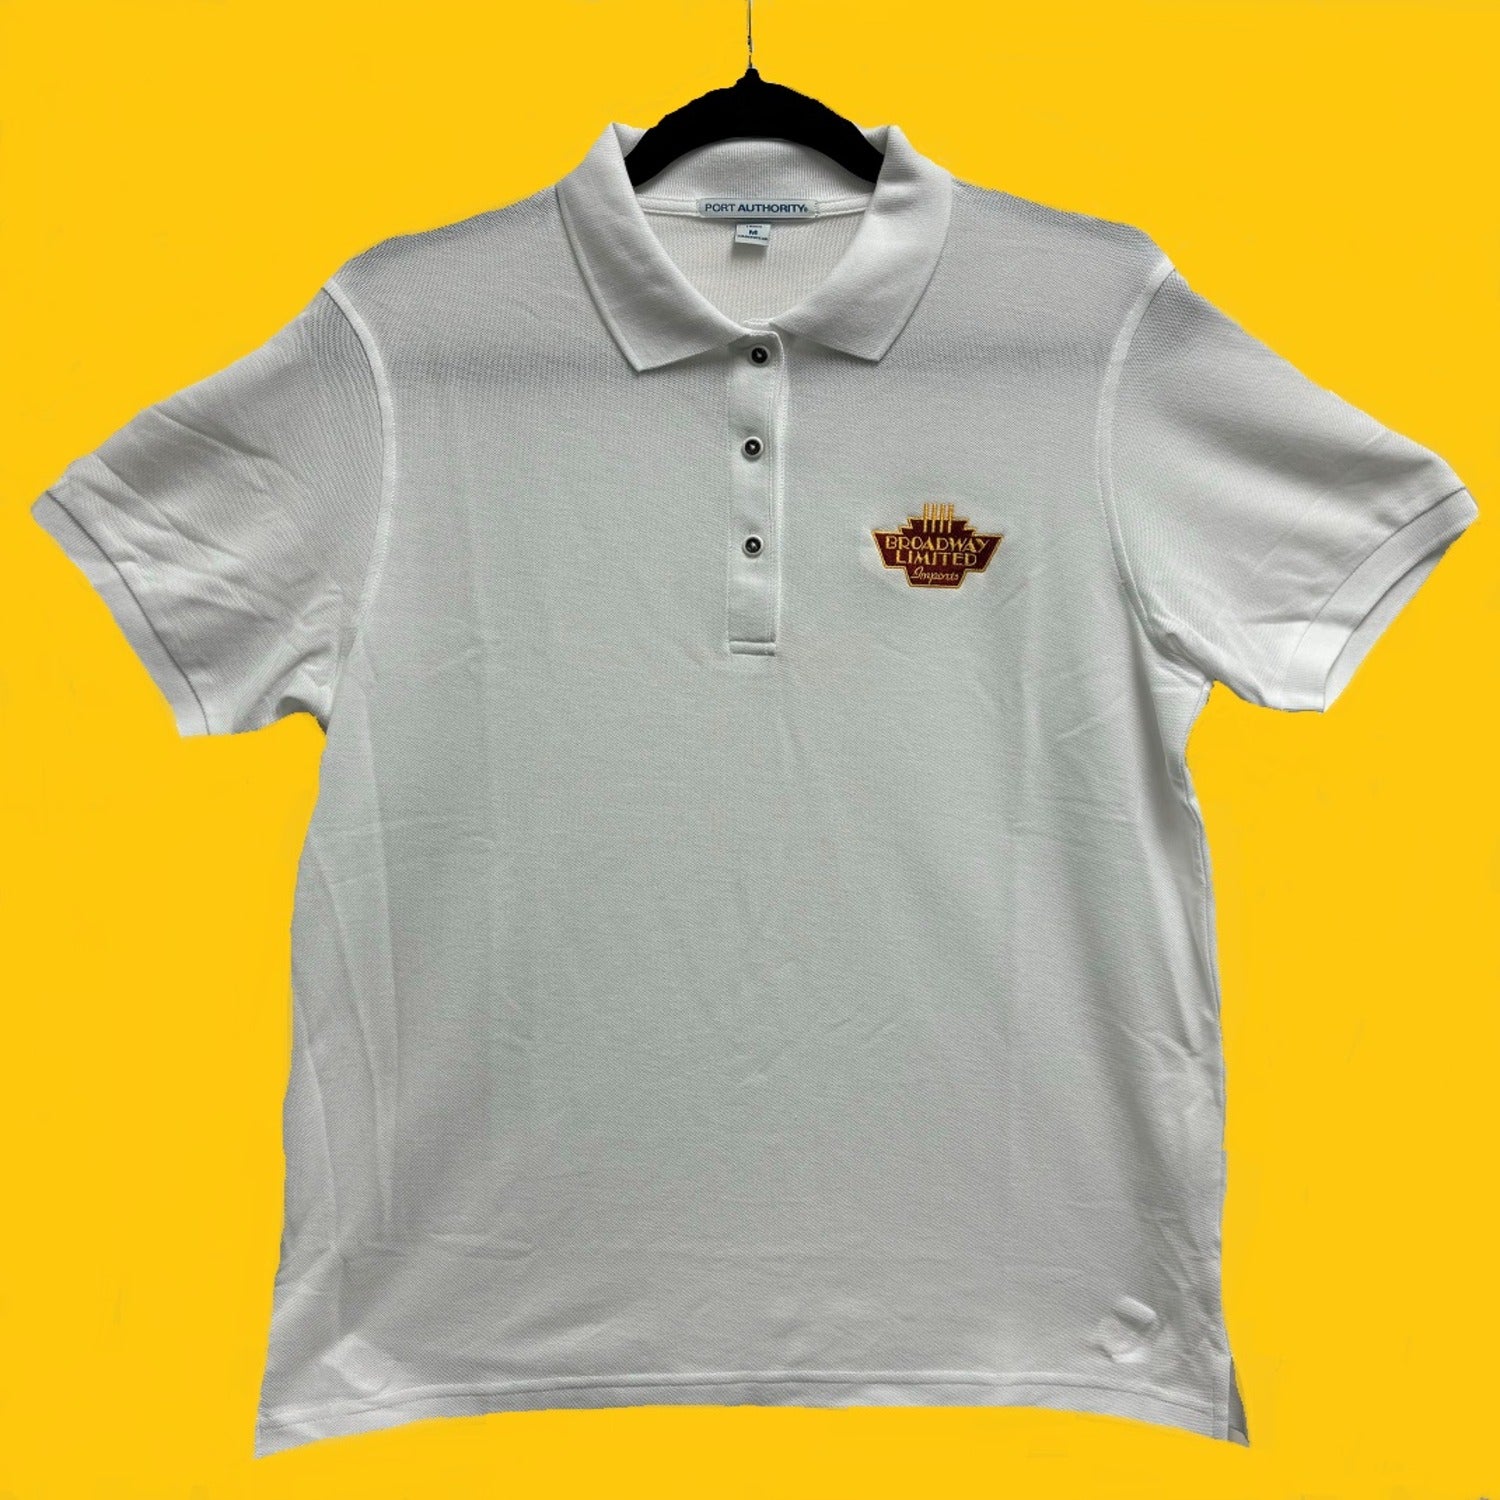 Our Refurbished Outlet Store Now has Broadway Limited Imports Polo Shirts with Logo for Men and Women